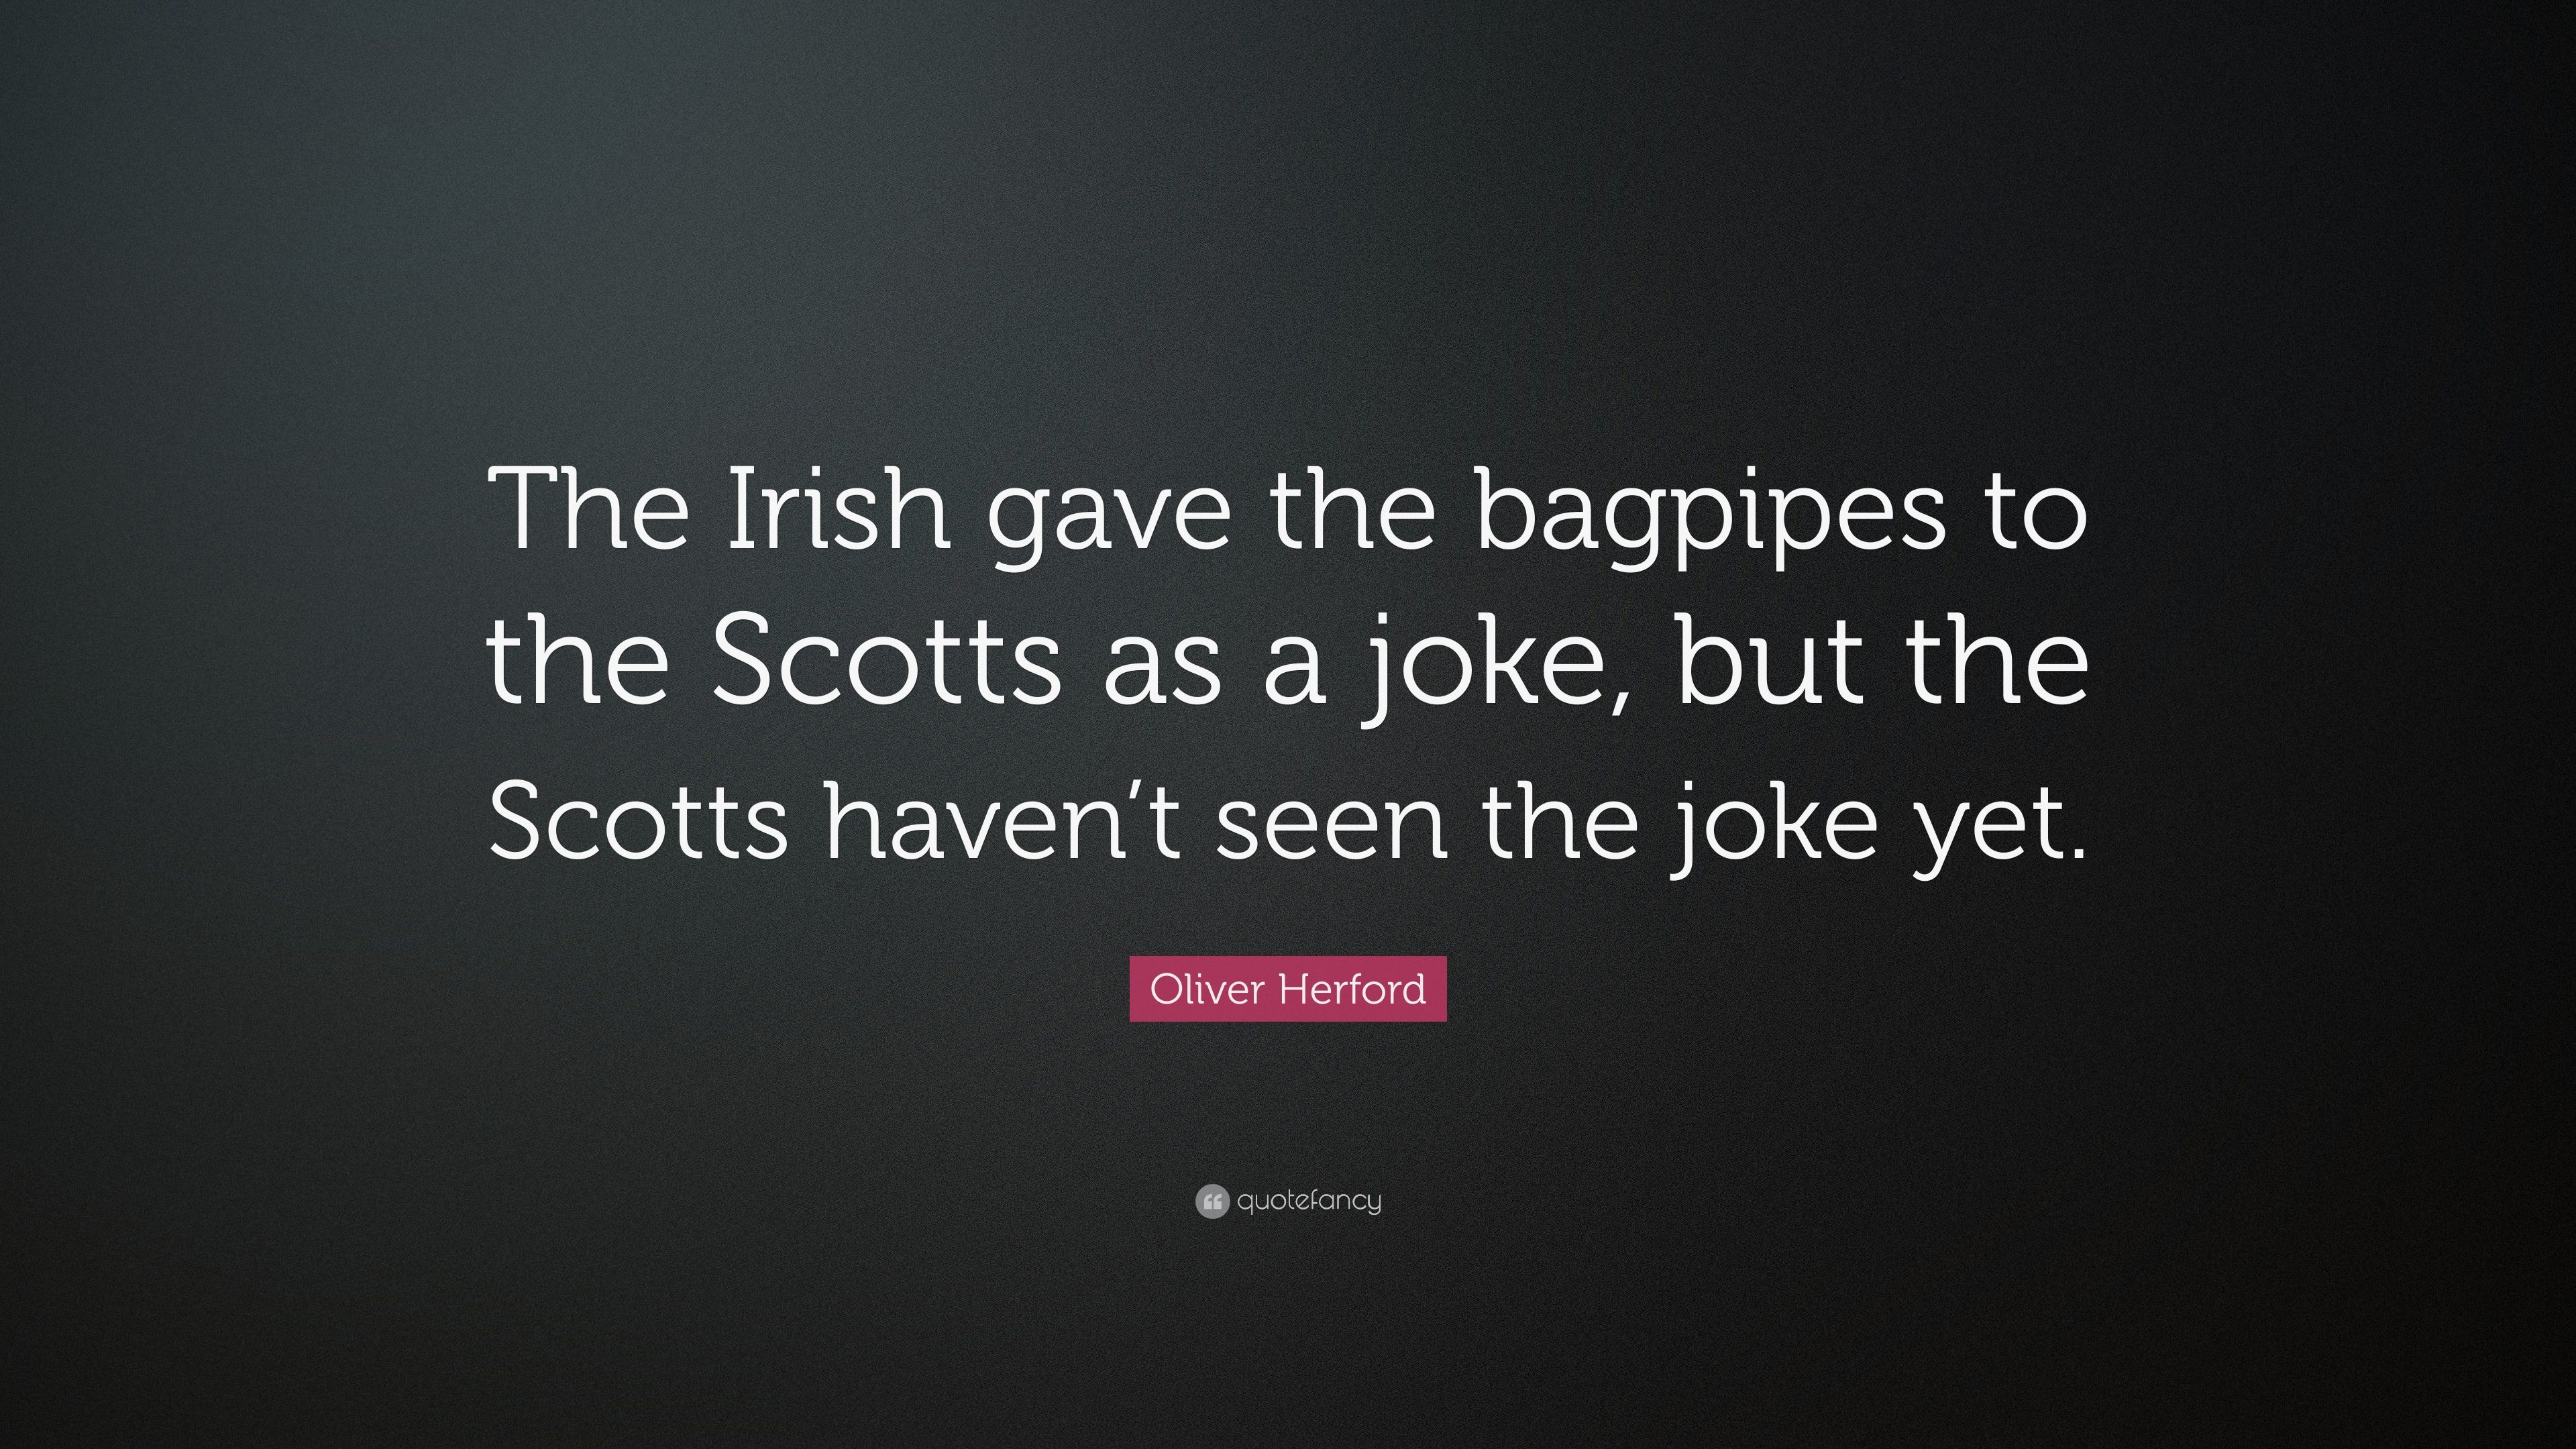 Oliver Herford Quote: “The Irish gave the bagpipes to the Scotts as